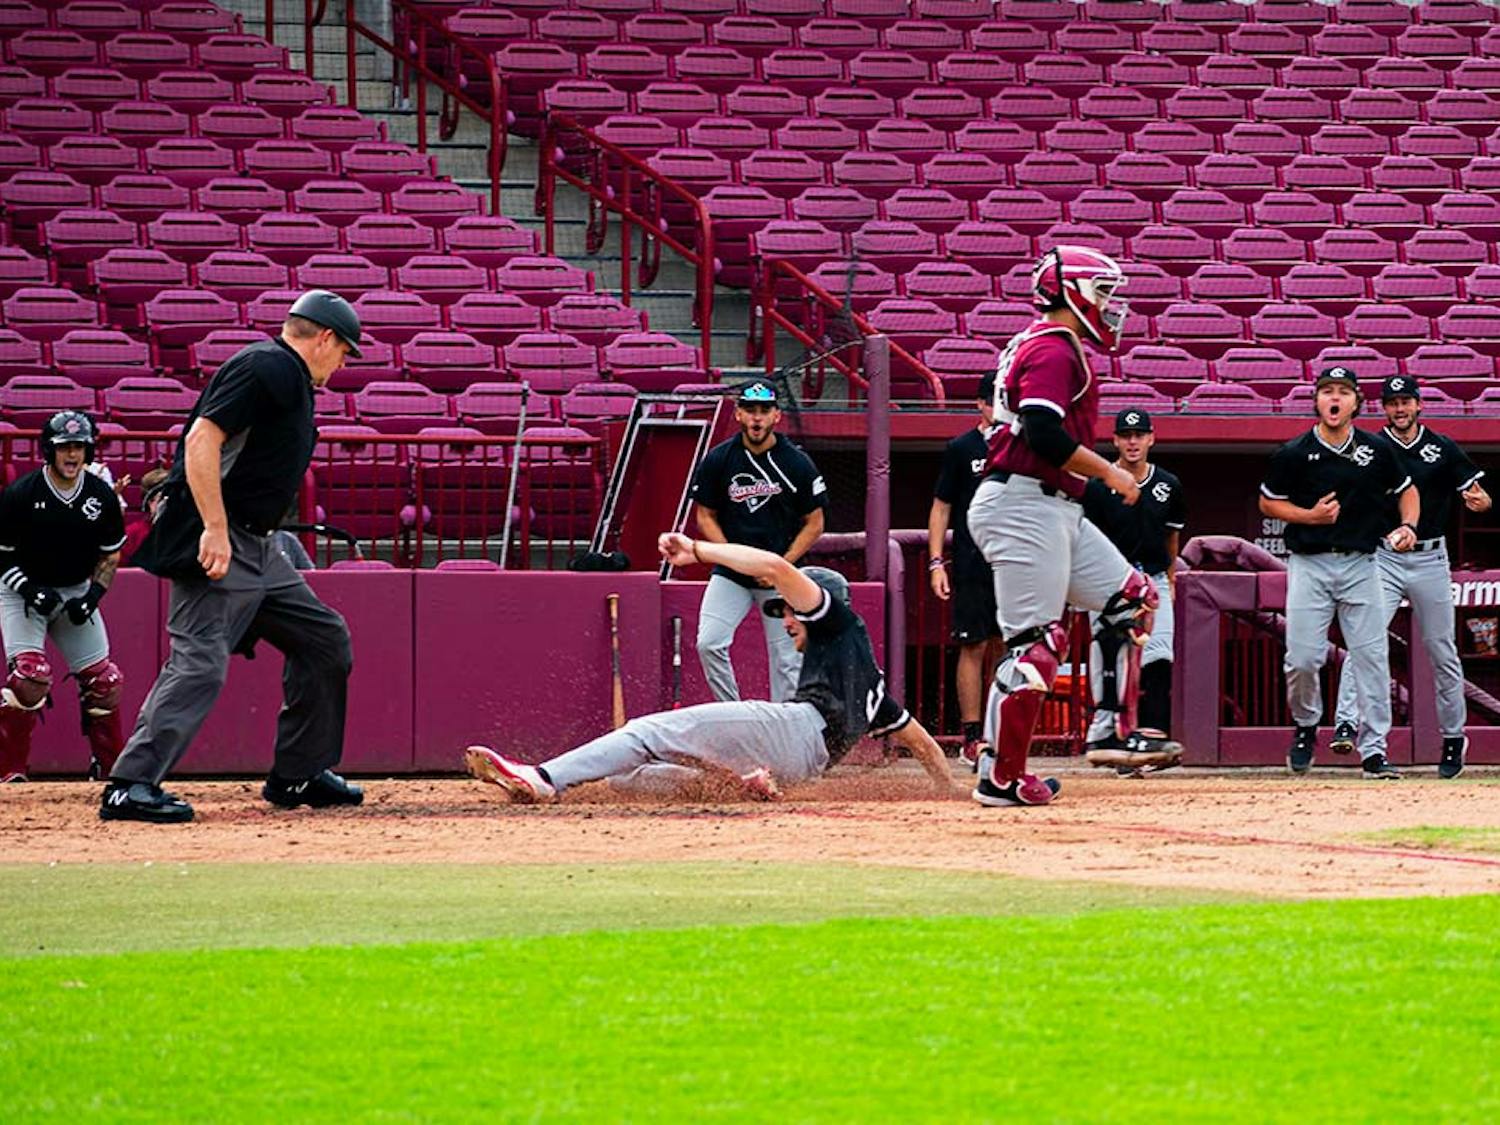 Junior infielder Braylen Wimmer slides home and scores a run for the Black team during a Garnet and Black scrimmage on Nov. 2, 2022. During the 2022 season, Wimmer scored a total of 38 runs and had a batting average of .312.